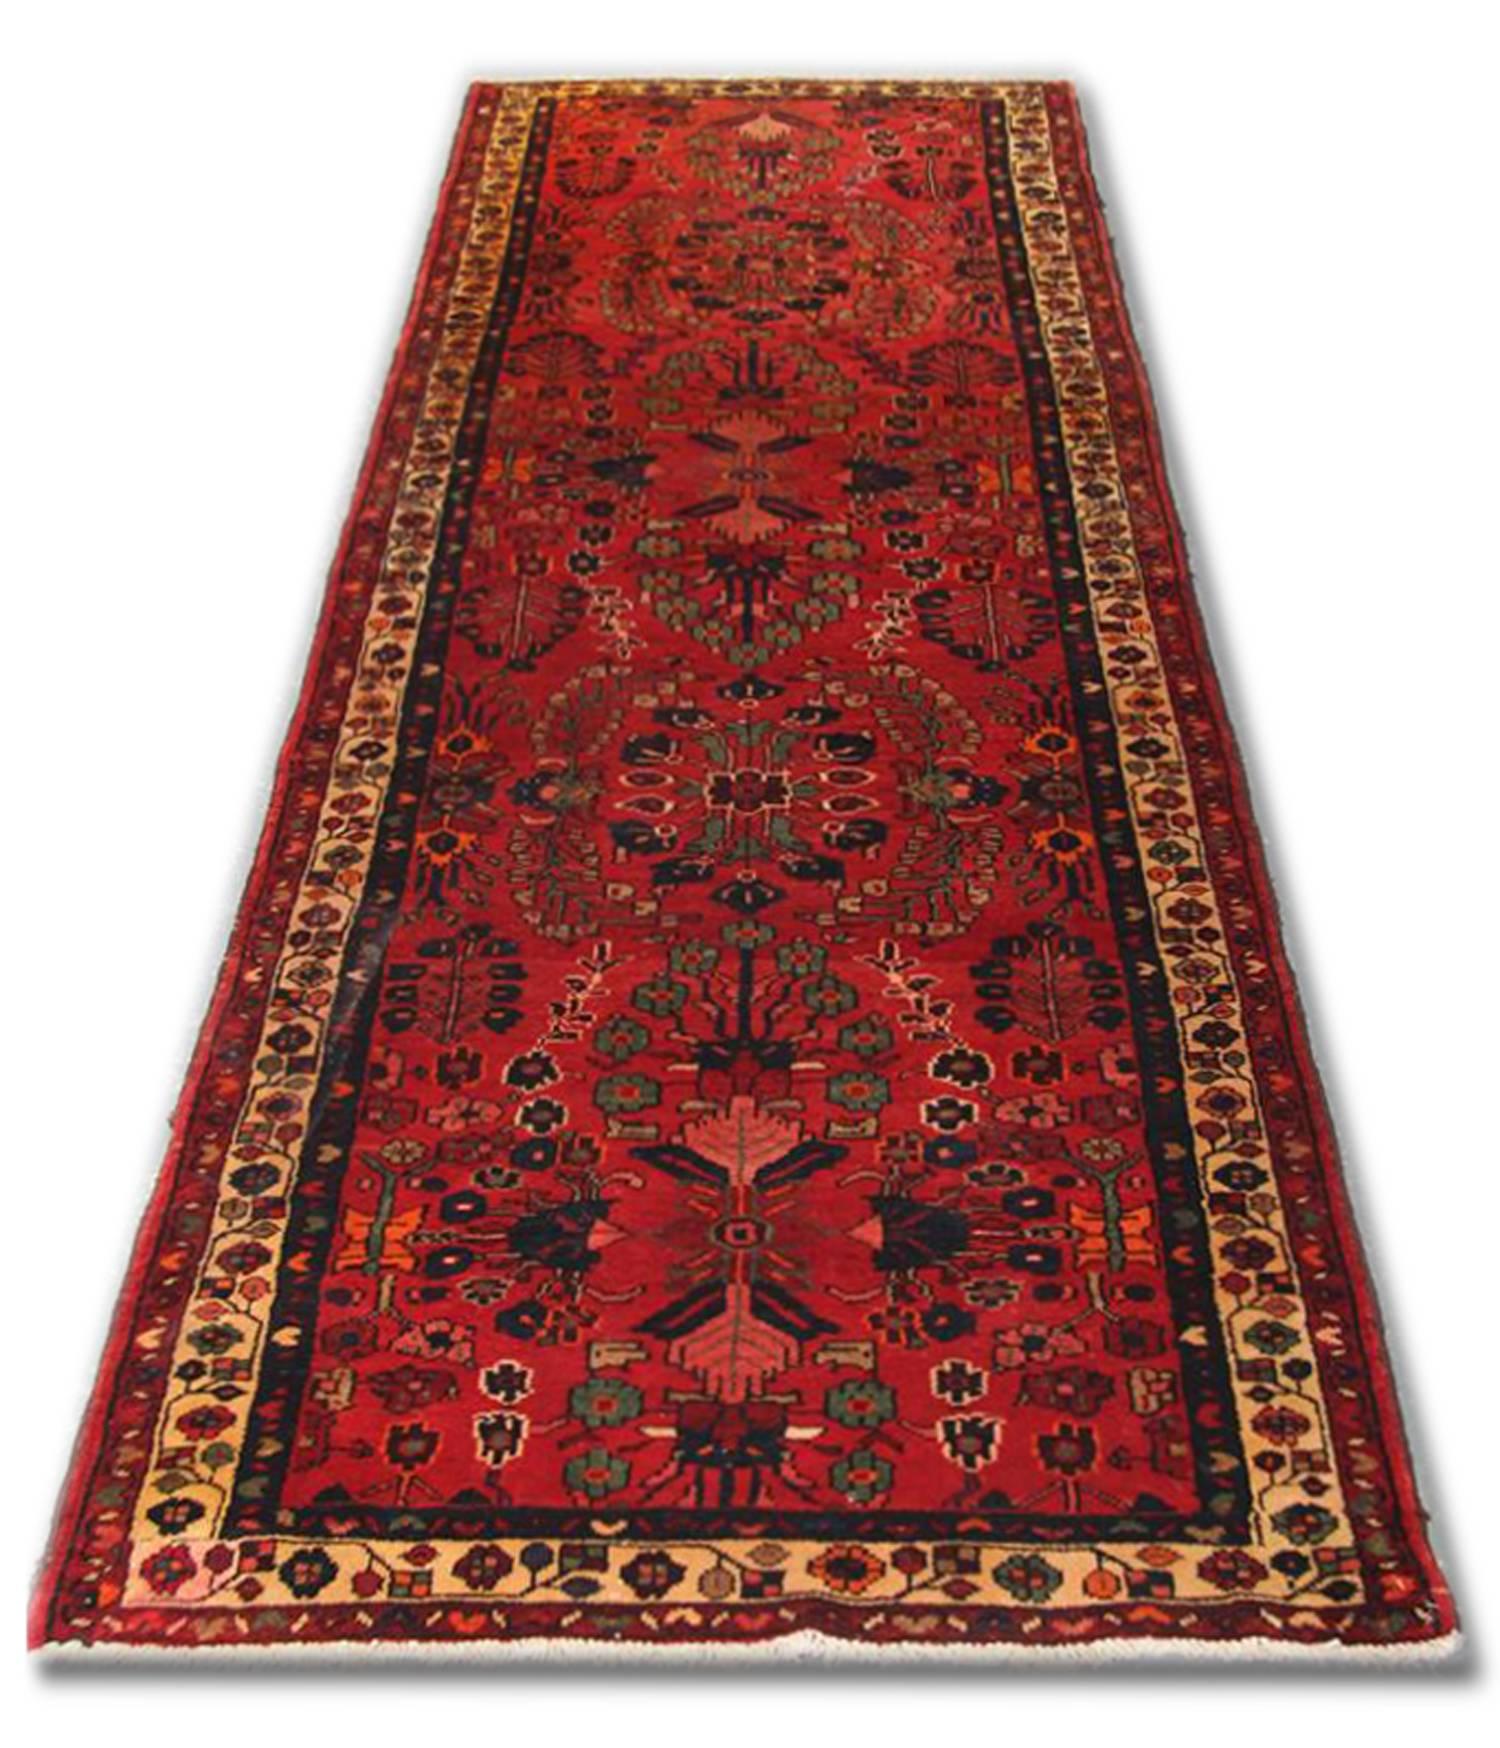 This fine wool rug was woven by hand in the 1940s and features a rich red background and elegant repeat pattern design.
Constructed with the finest organic materials including hand-spun wool which has been intricately hand knotted to create an